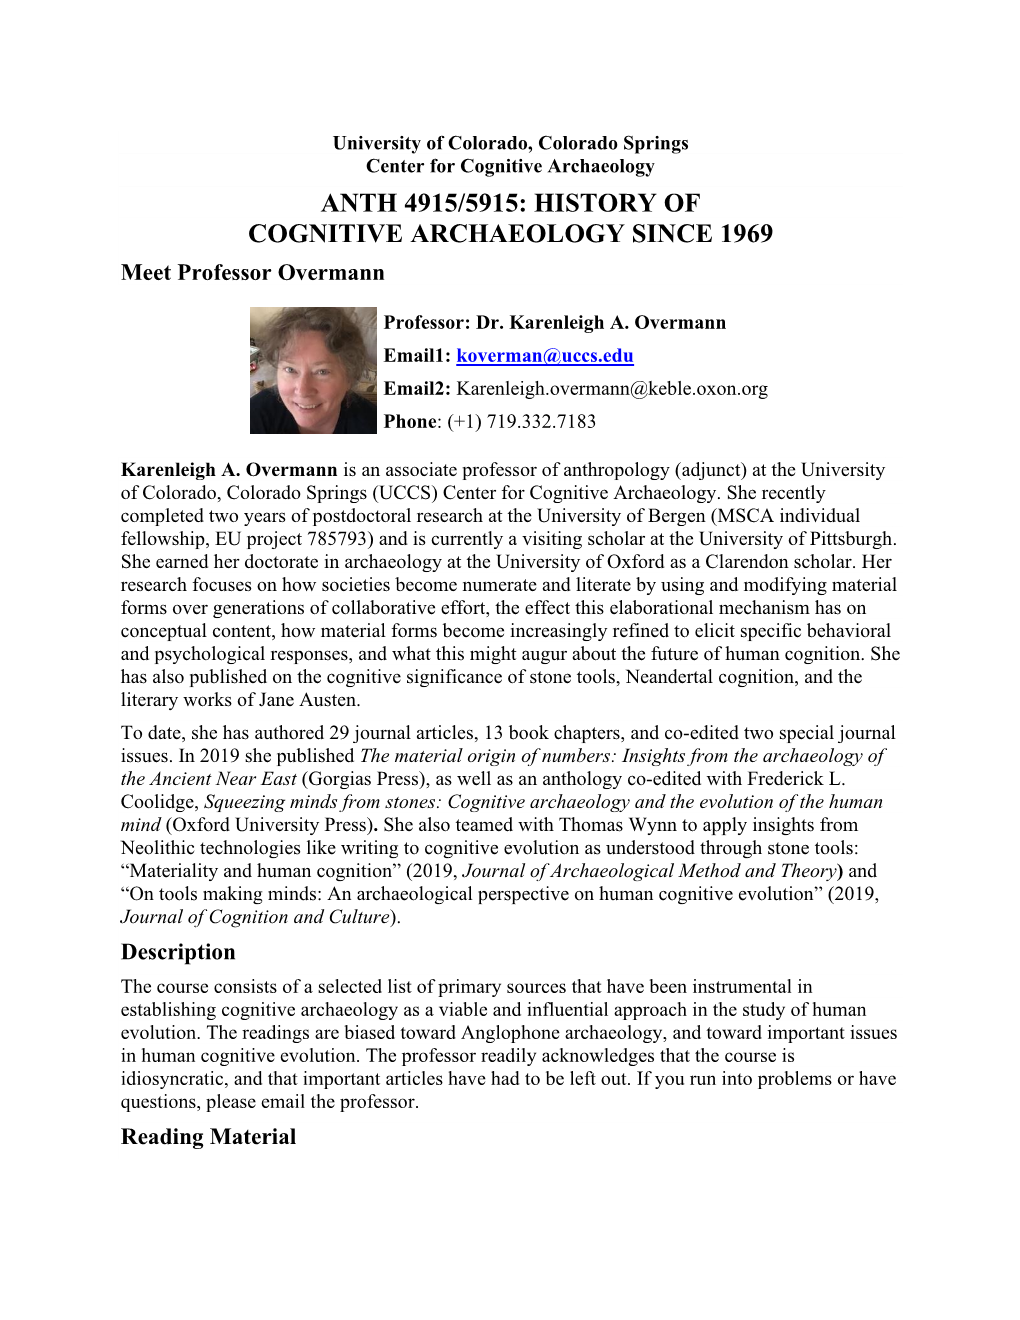 ANTH 4915/5915: HISTORY of COGNITIVE ARCHAEOLOGY SINCE 1969 Meet Professor Overmann